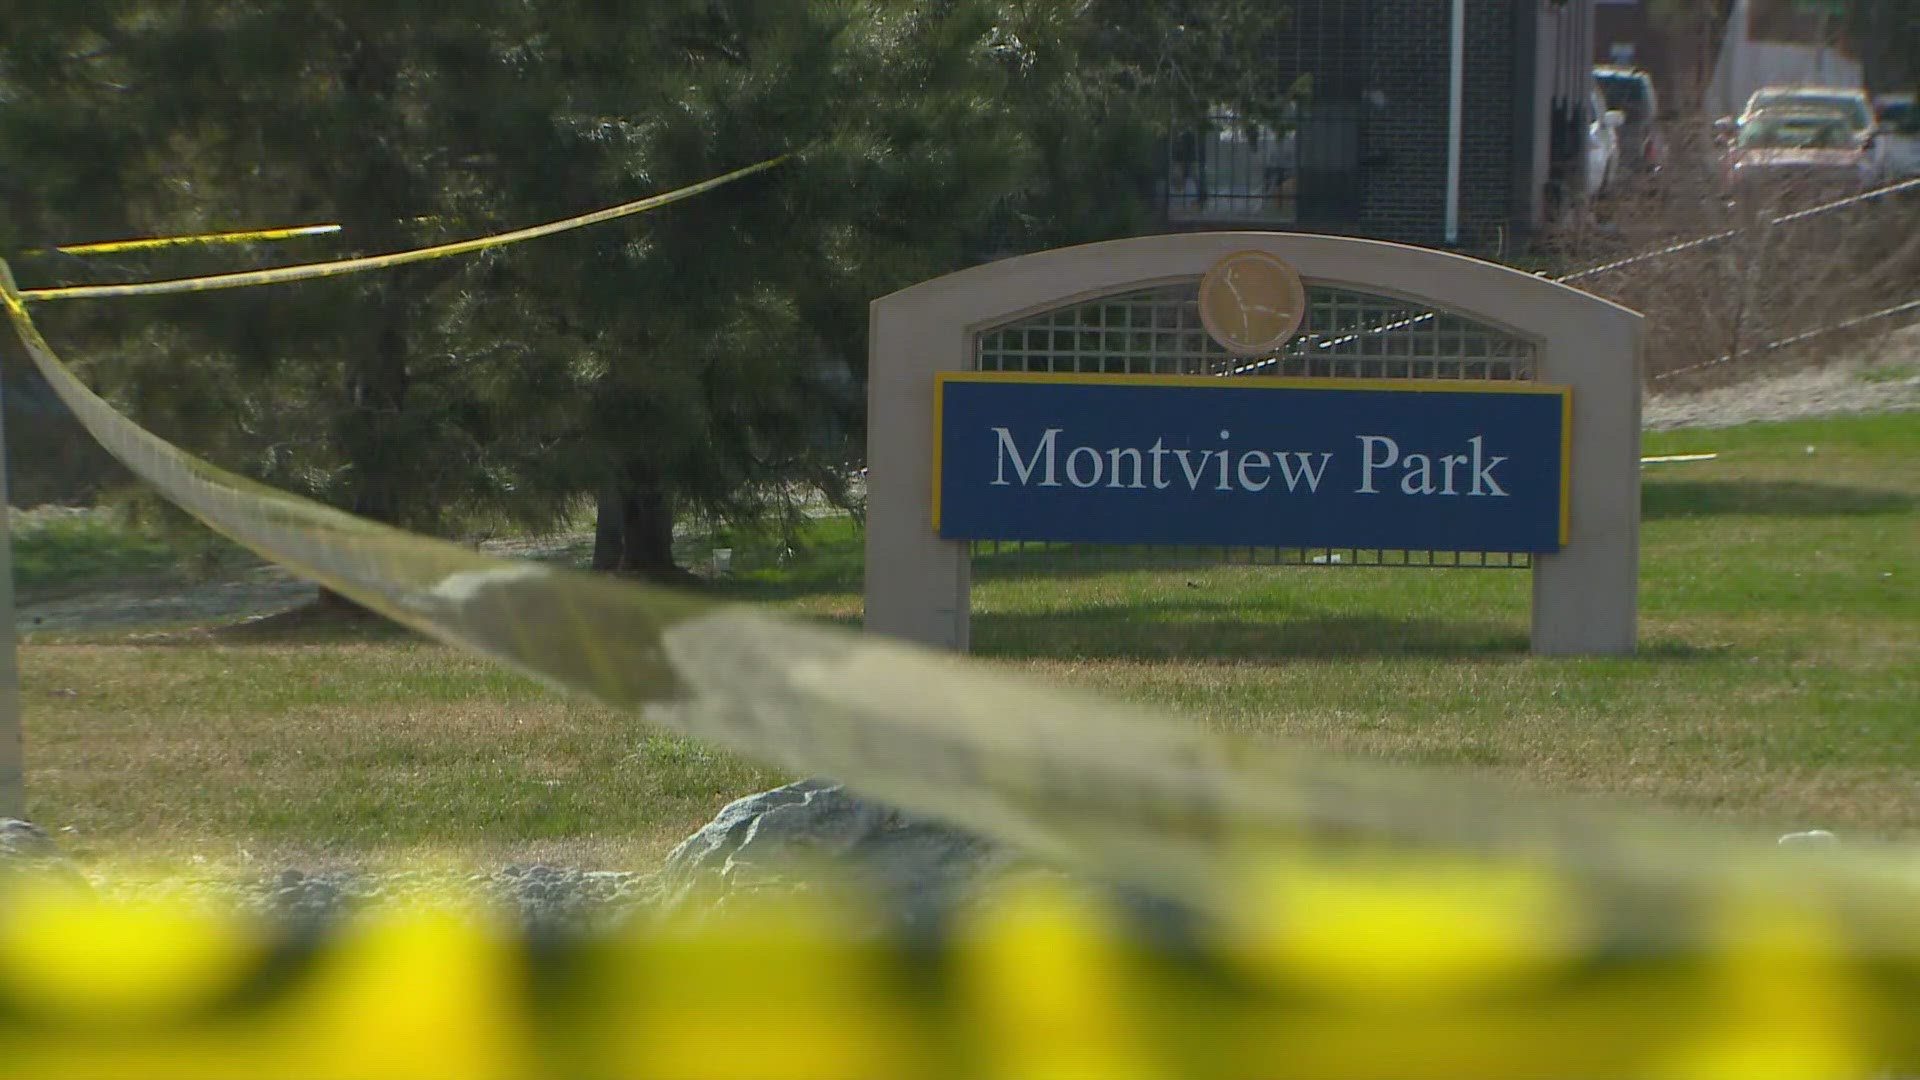 Police are looking for two suspects in the shooting at Montview Park Thursday.